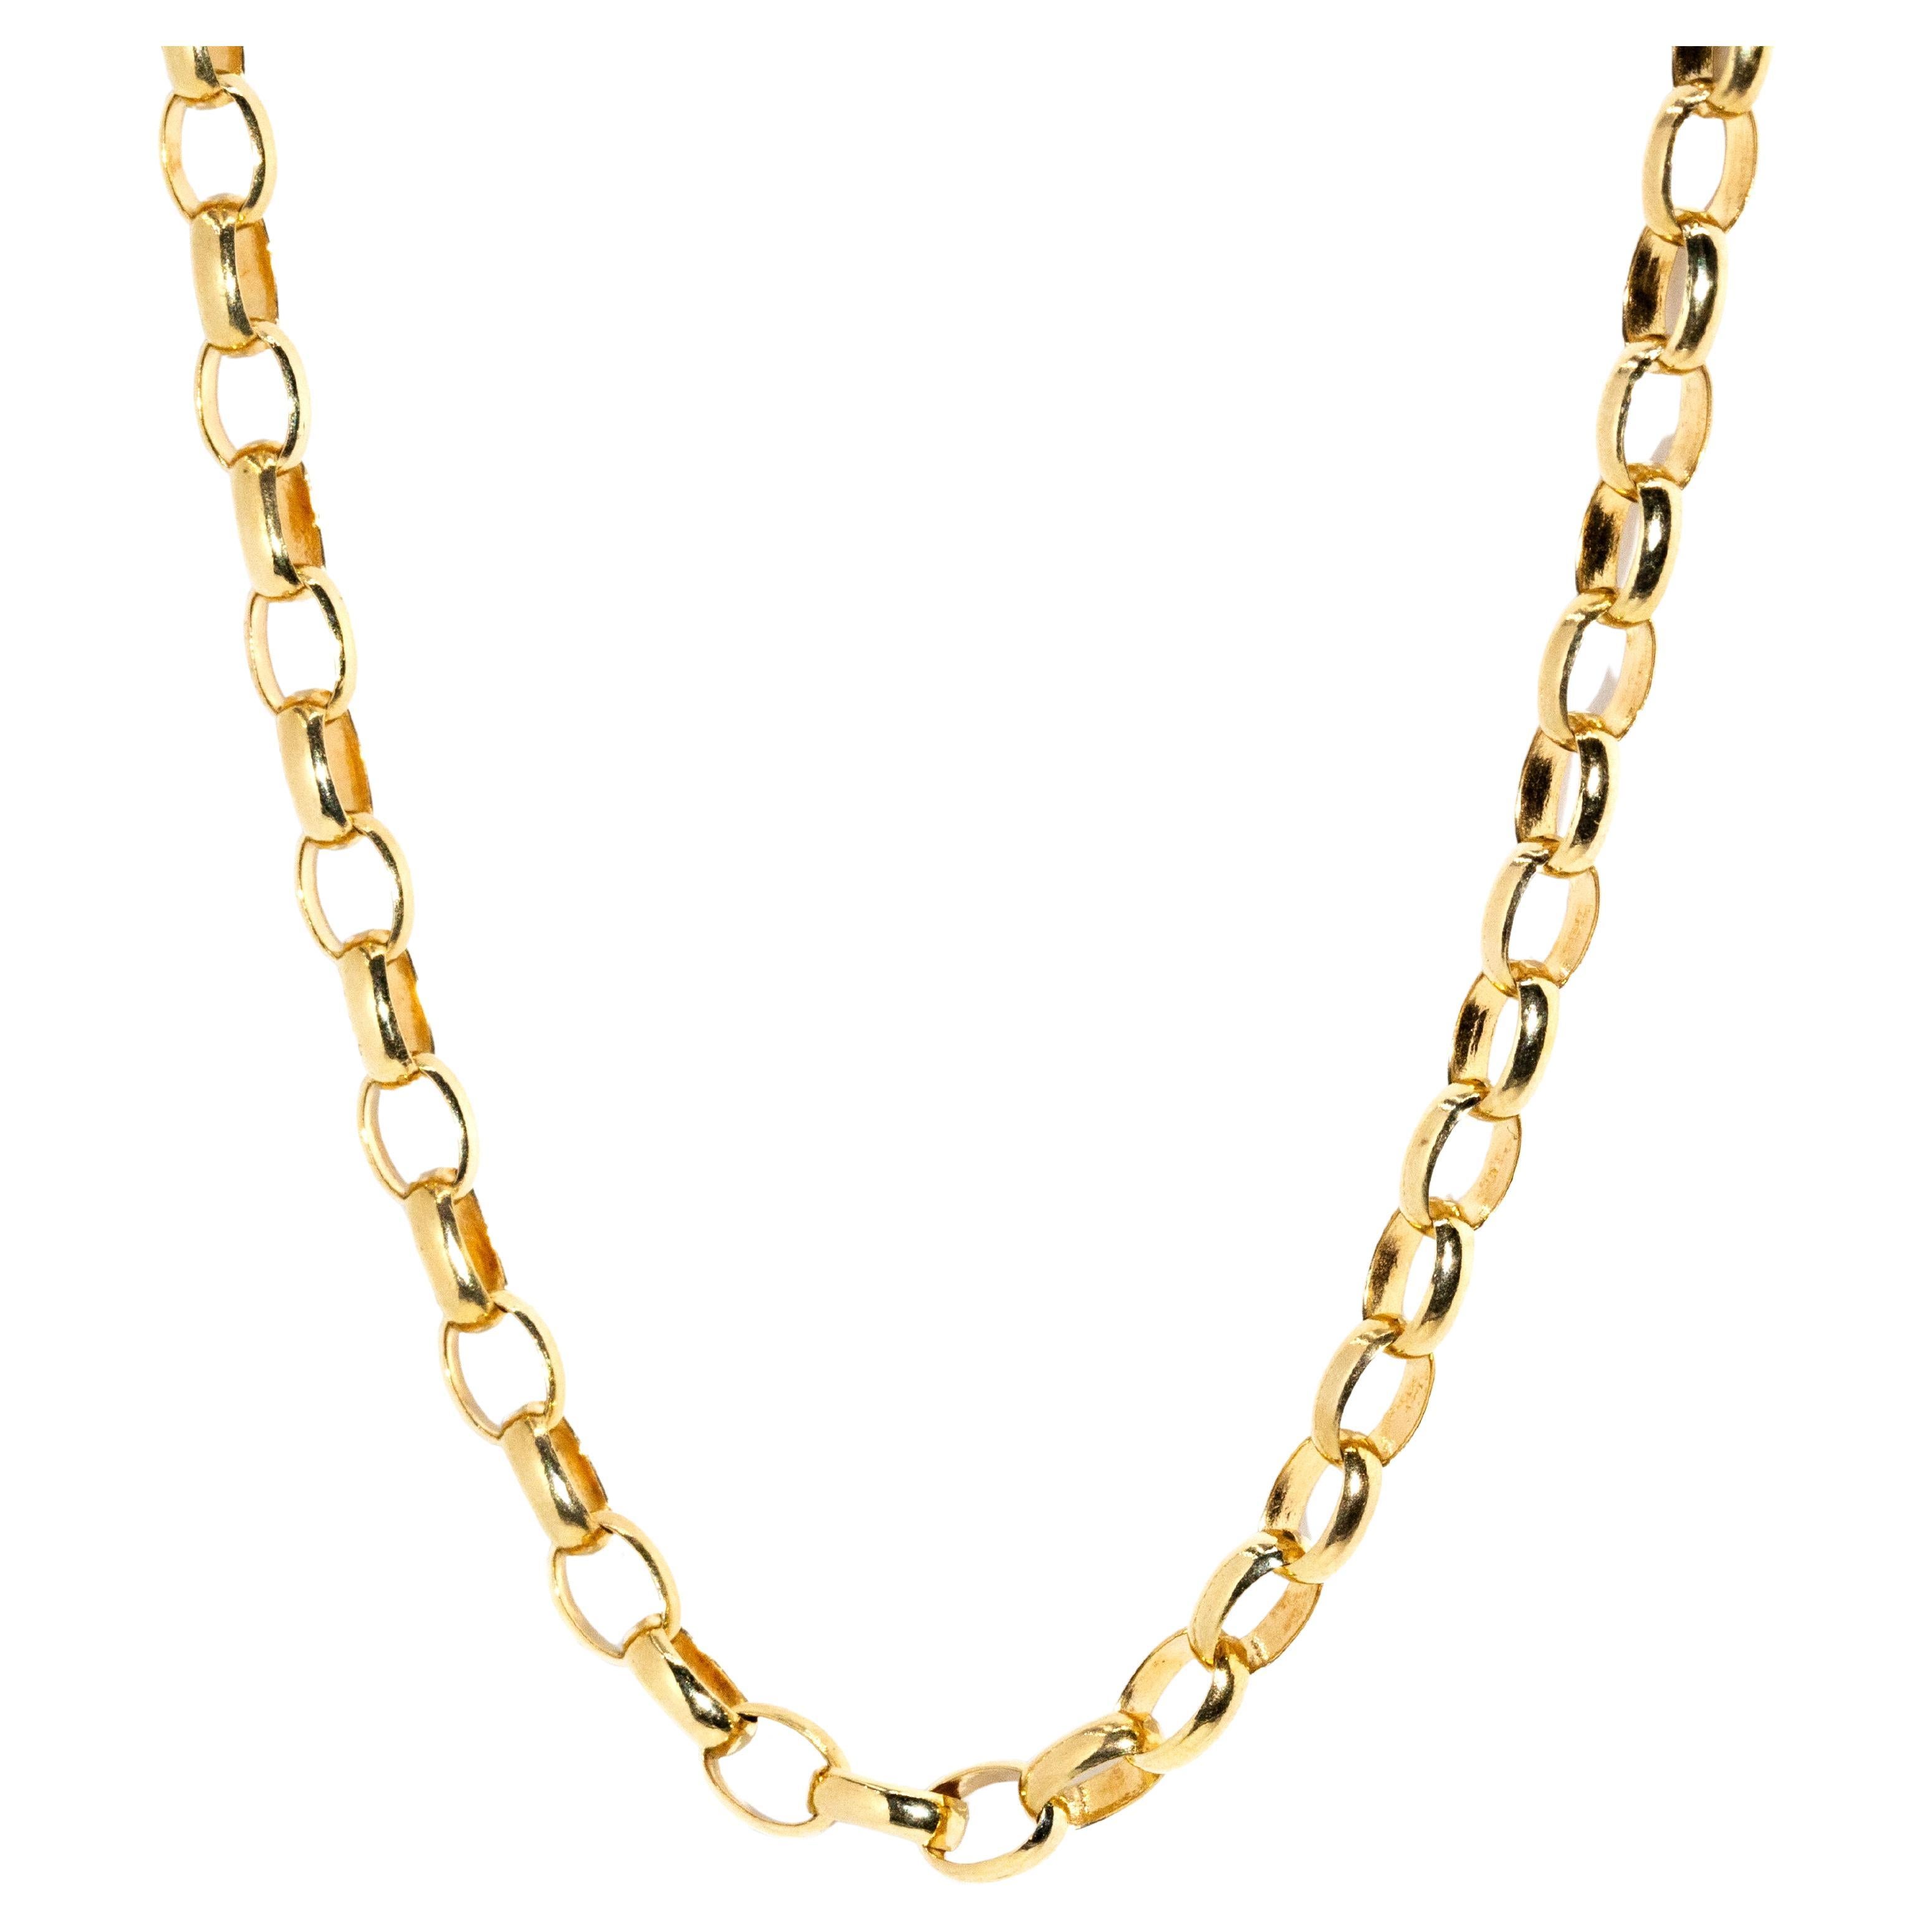 Vintage Circa 1980s Diamond Cut Heavy Oval Link Chain 9 Carat Yellow Gold For Sale